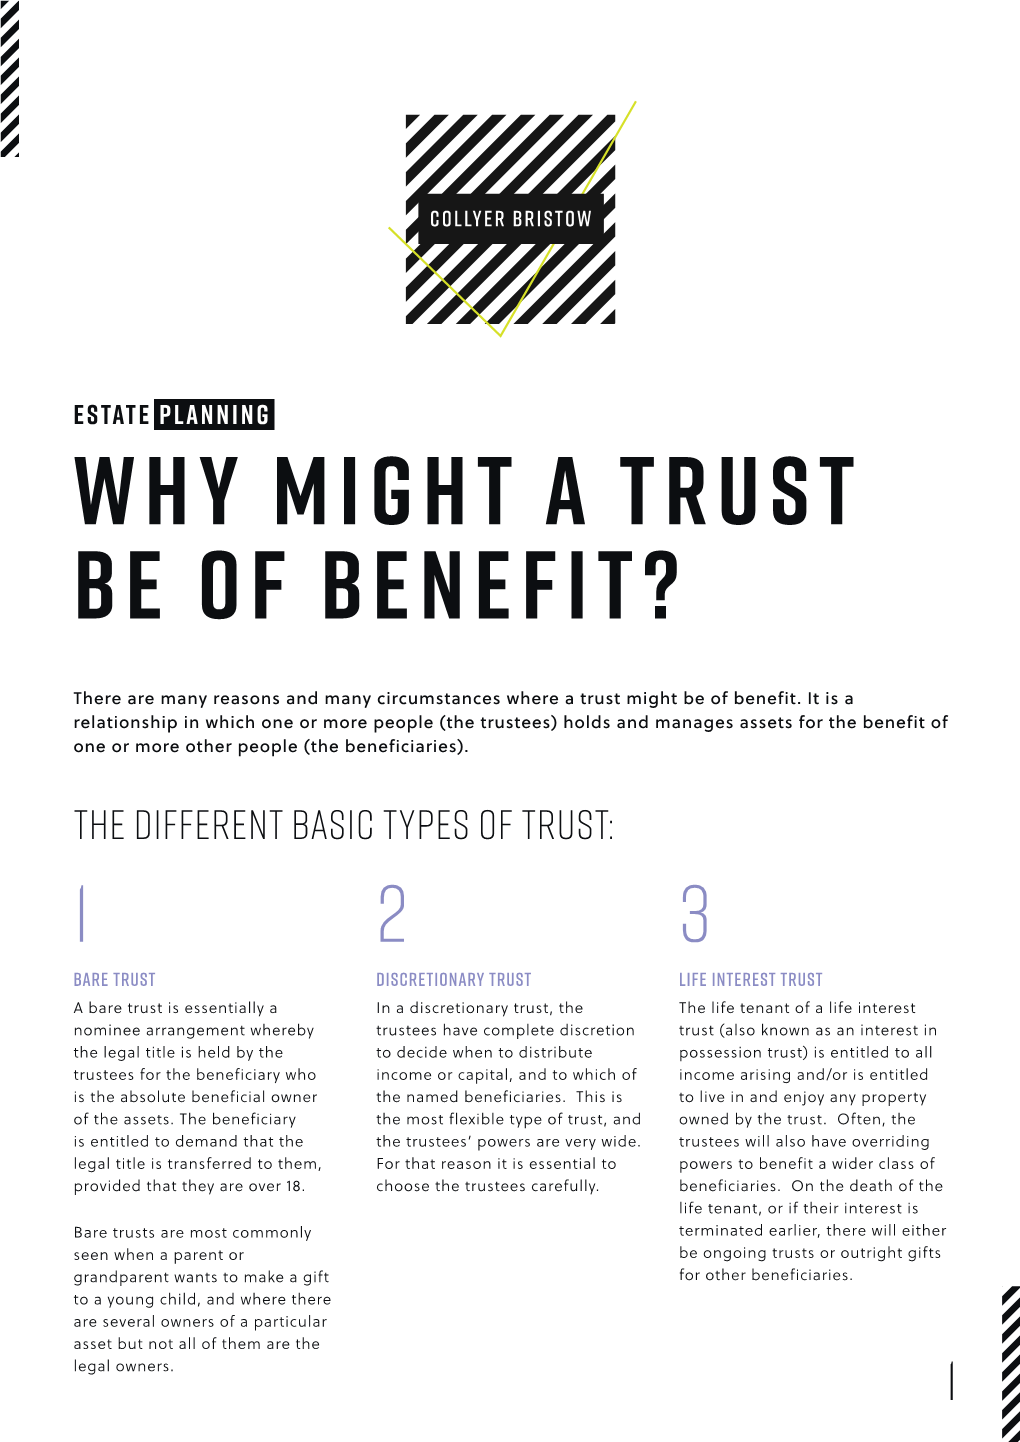 Guide: Why Might a Trust Be of Benefit?